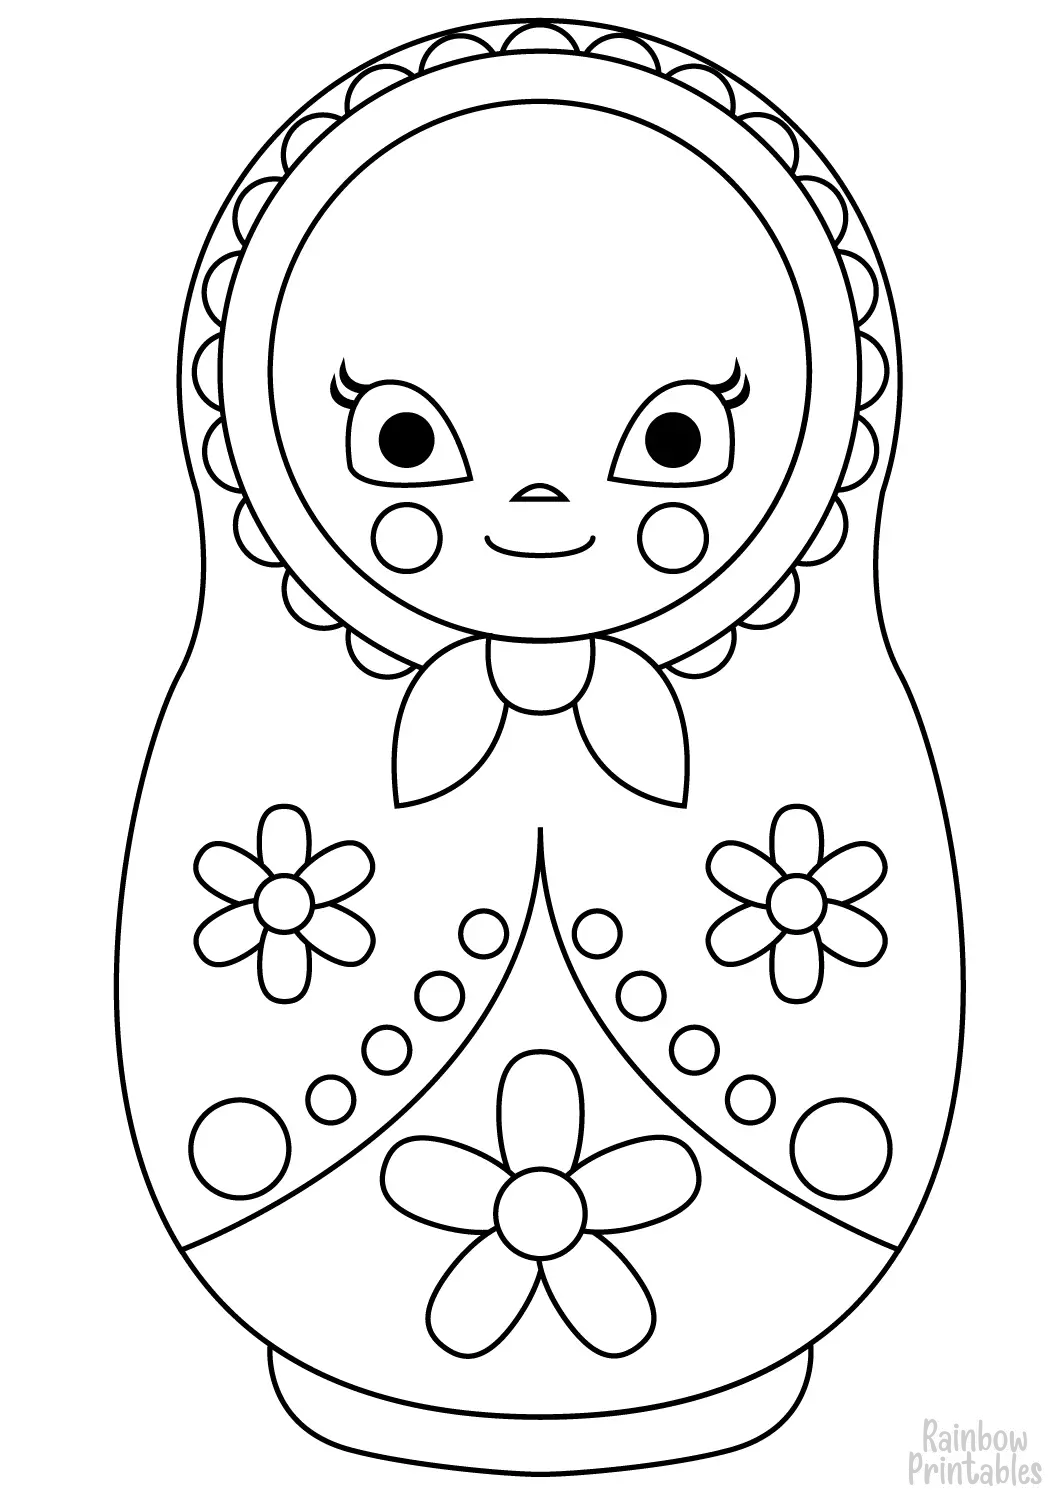 RUSSIAN NESTING DOLL matryoshka TOY Clipart Coloring Pages for Kids Adults Art Activities Line Art